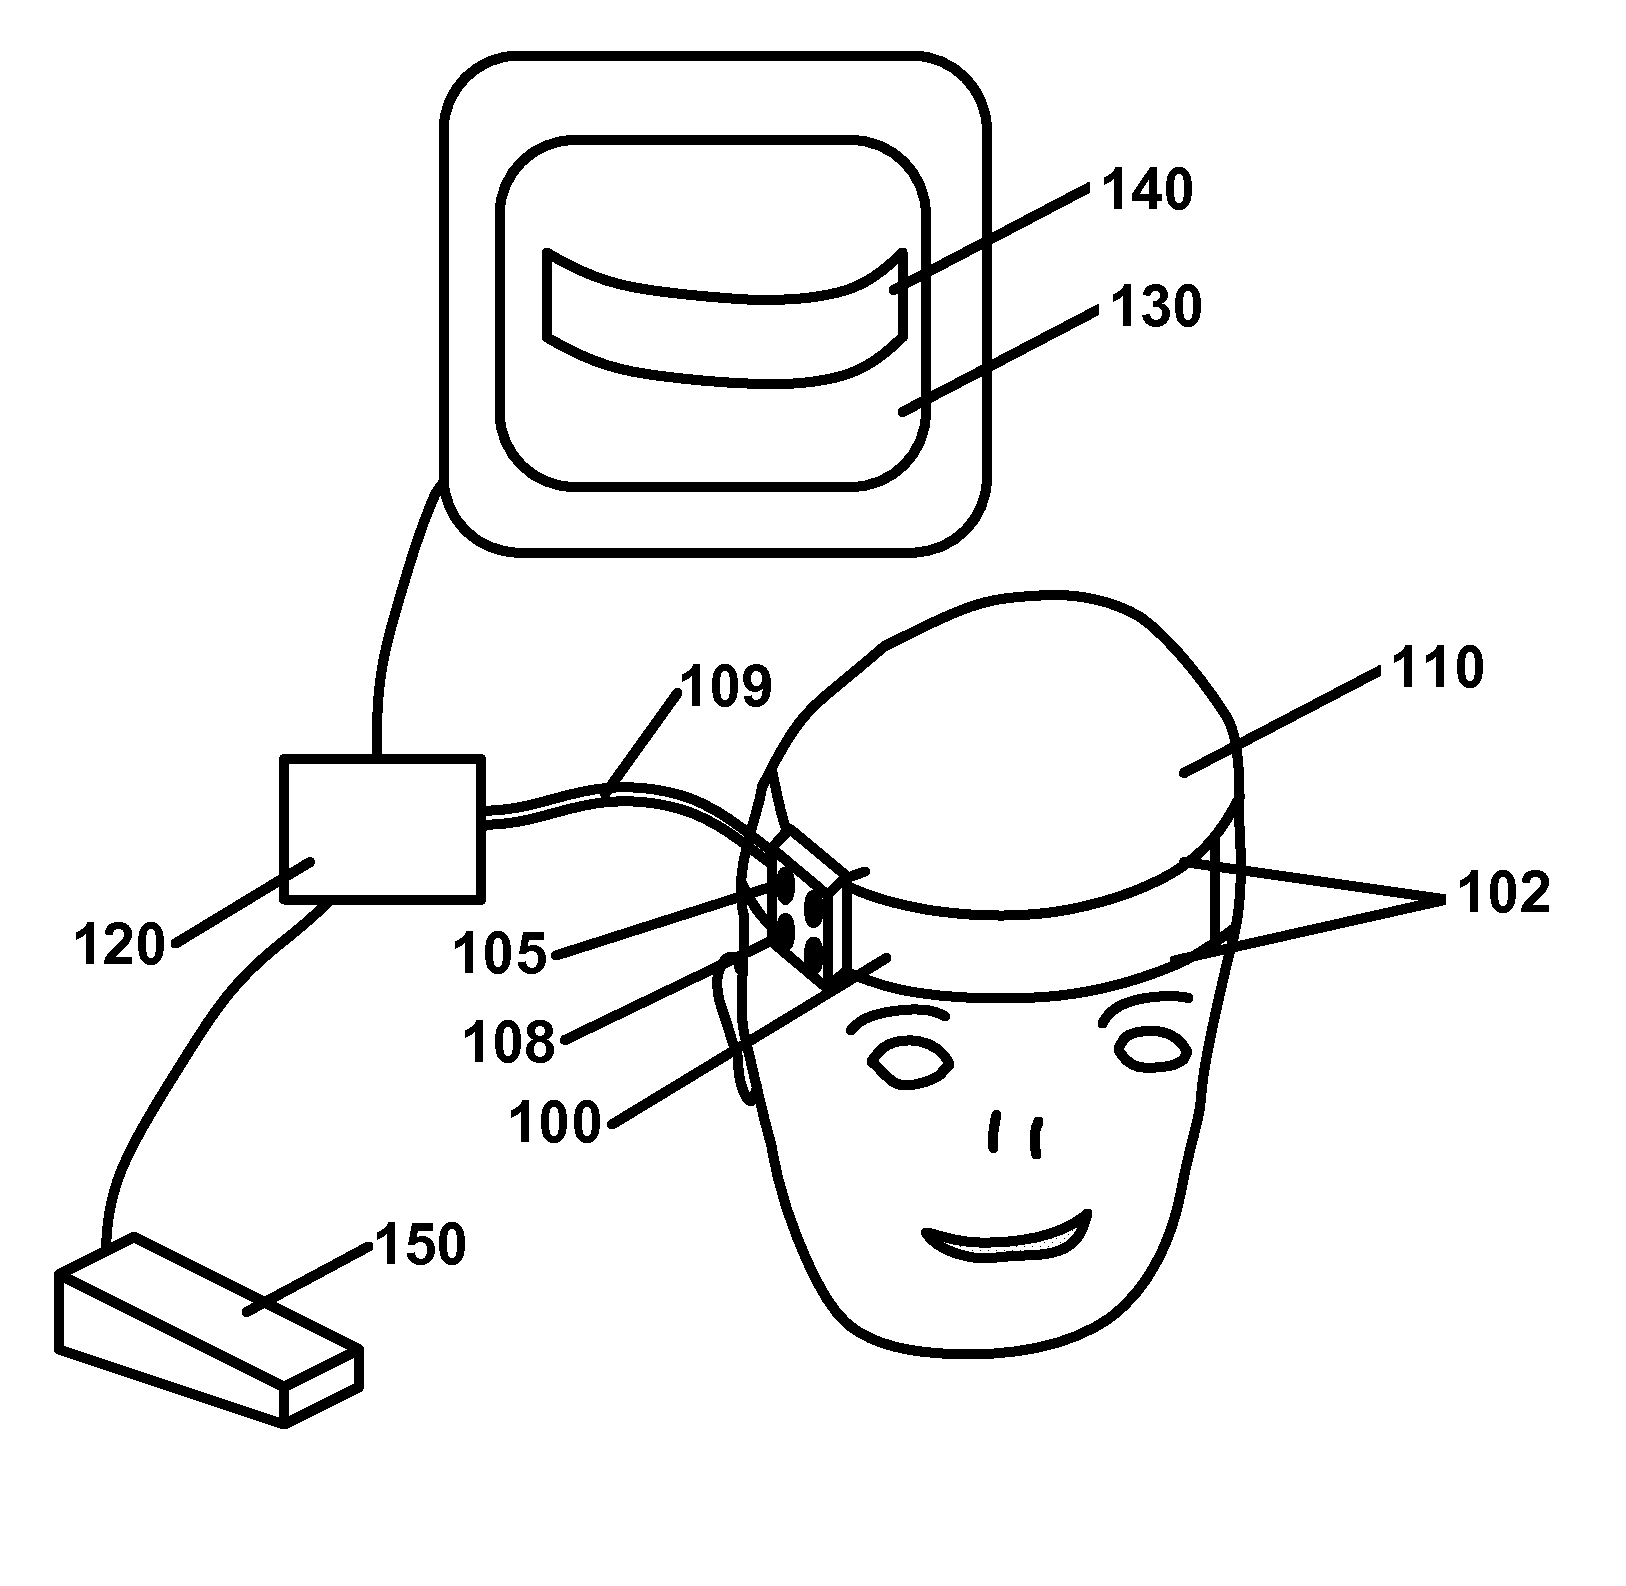 Apparatus for registering and tracking an instrument